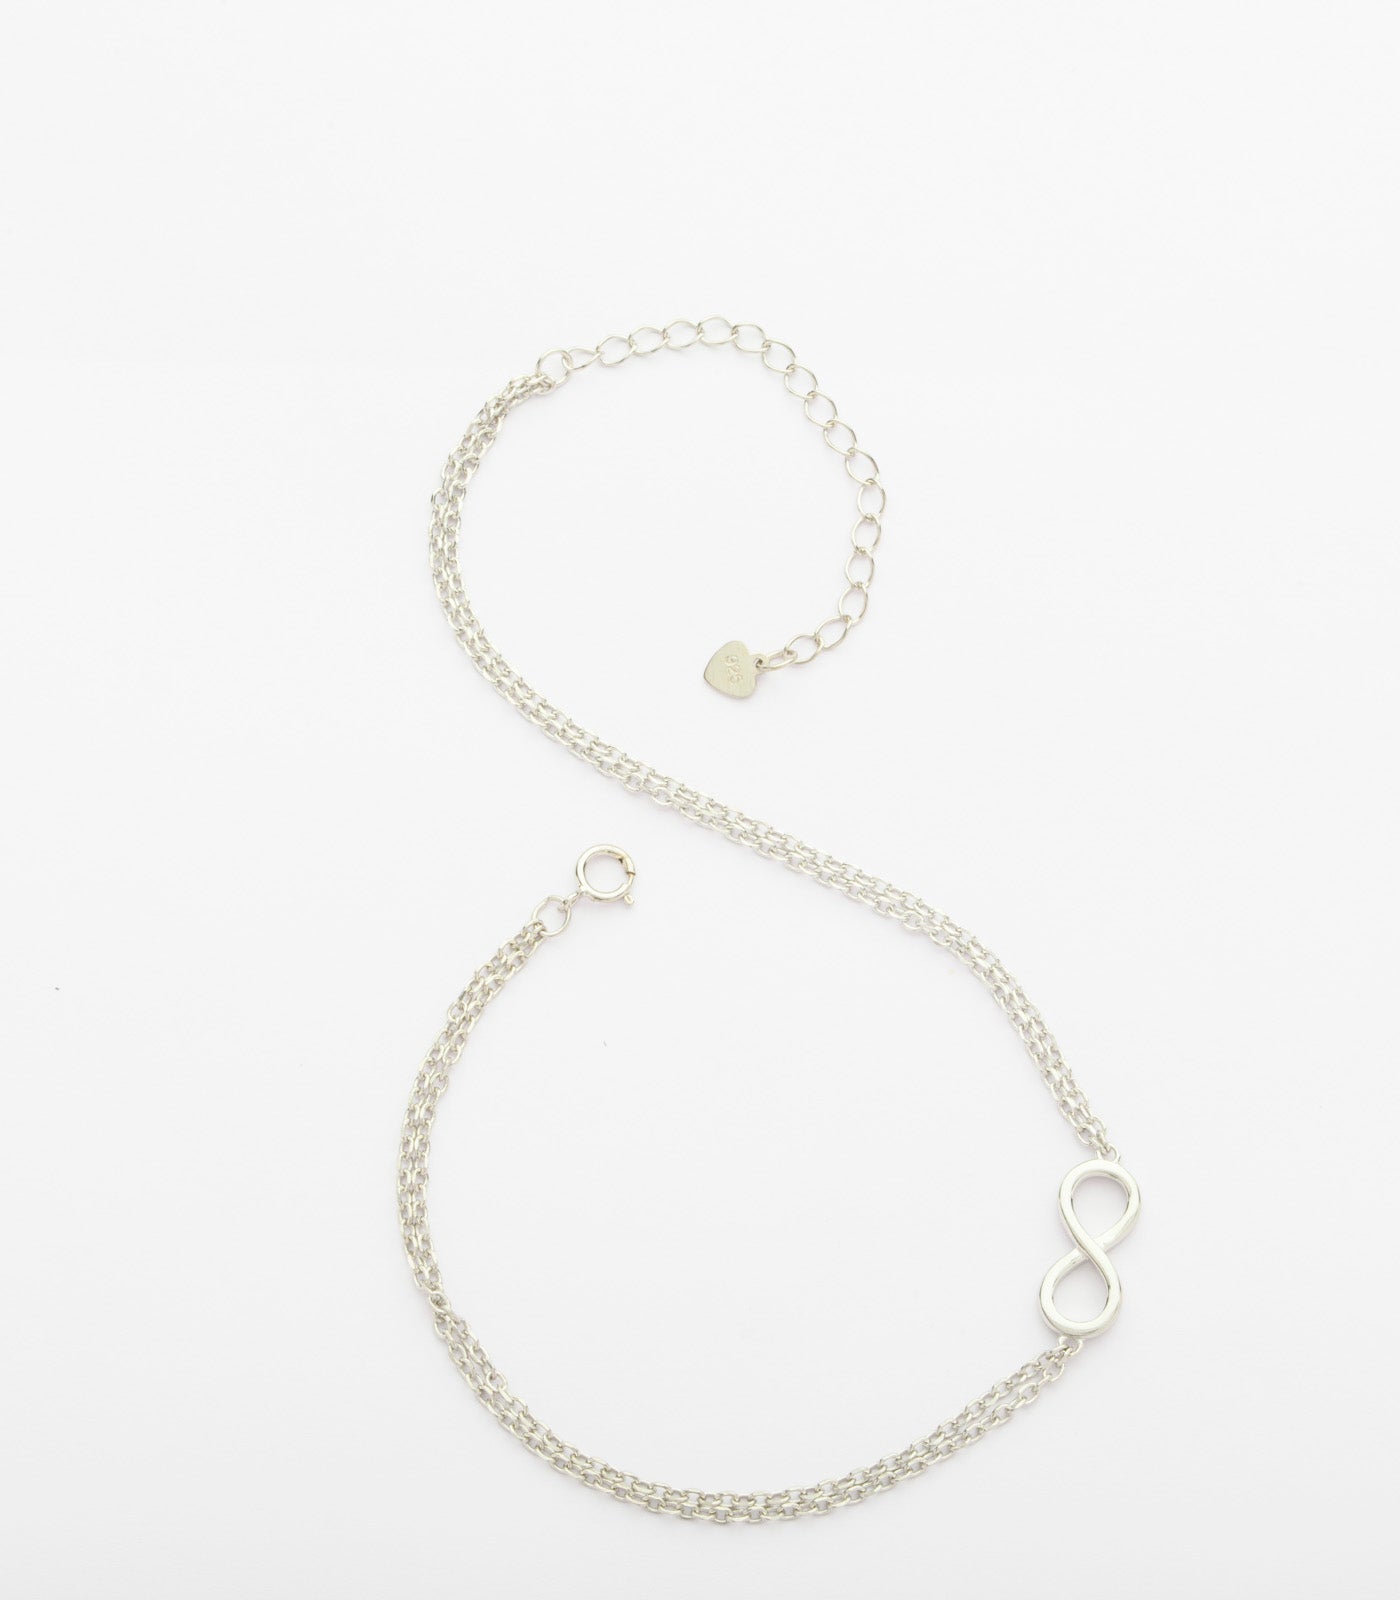 Exquisite Silver Chain Anklet (Silver)